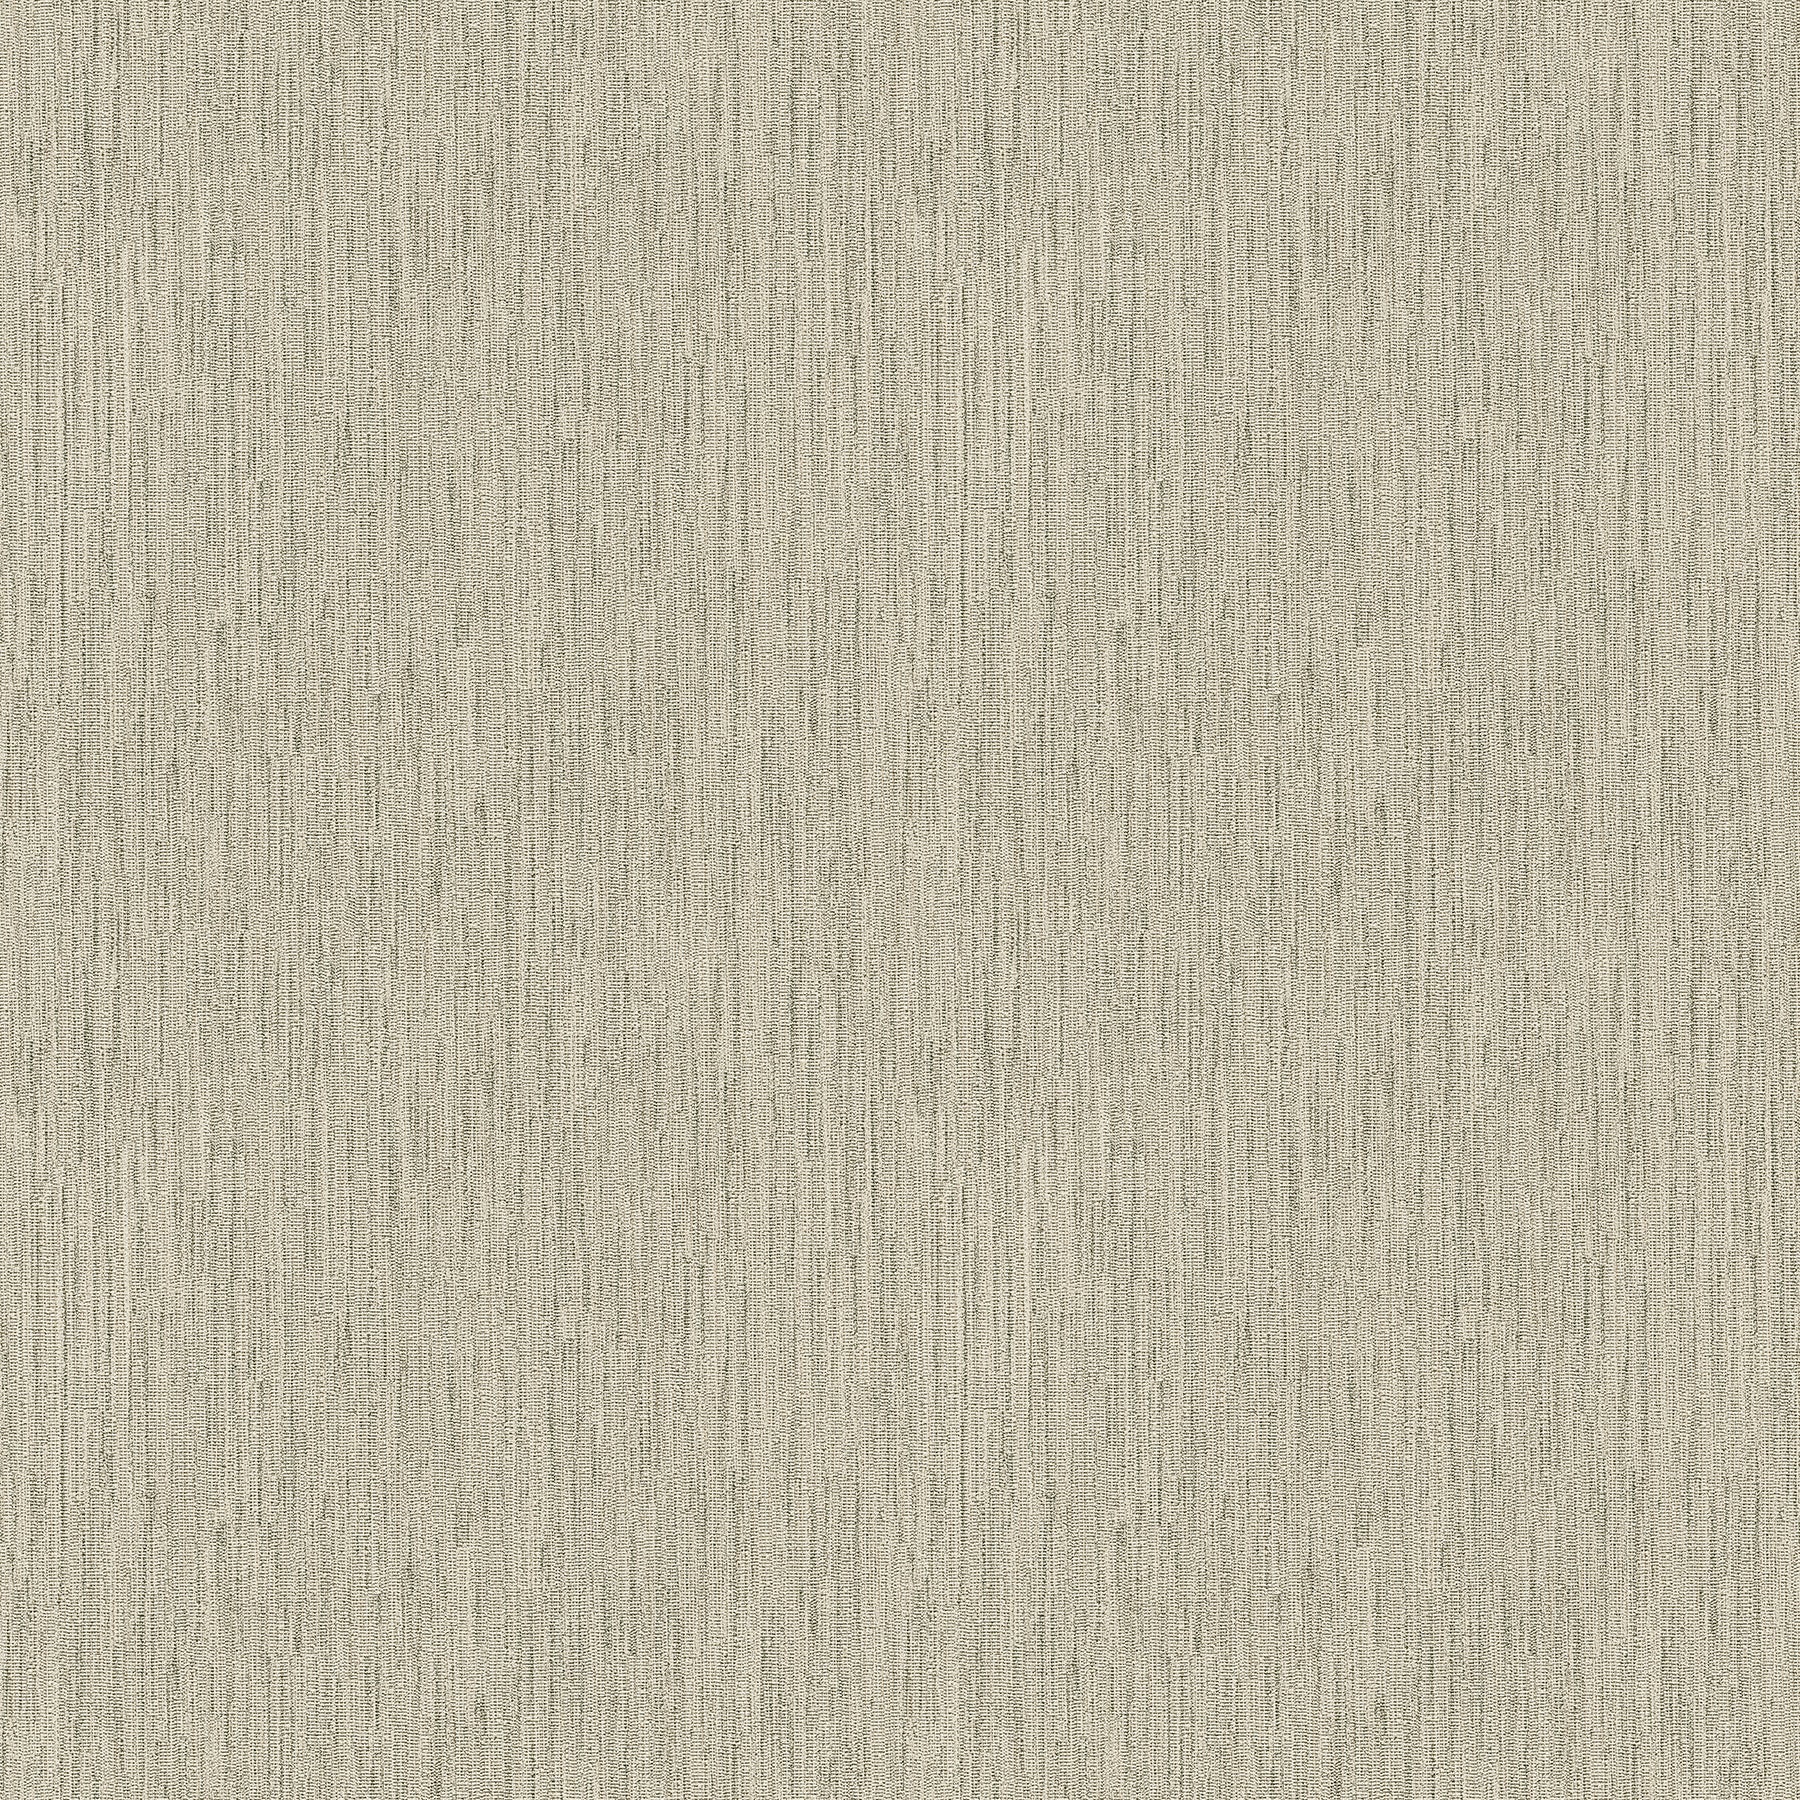 Search 2971-86339 Dimensions Terence Light Brown Pinstripe Texture Light Brown A-Street Prints Wallpaper